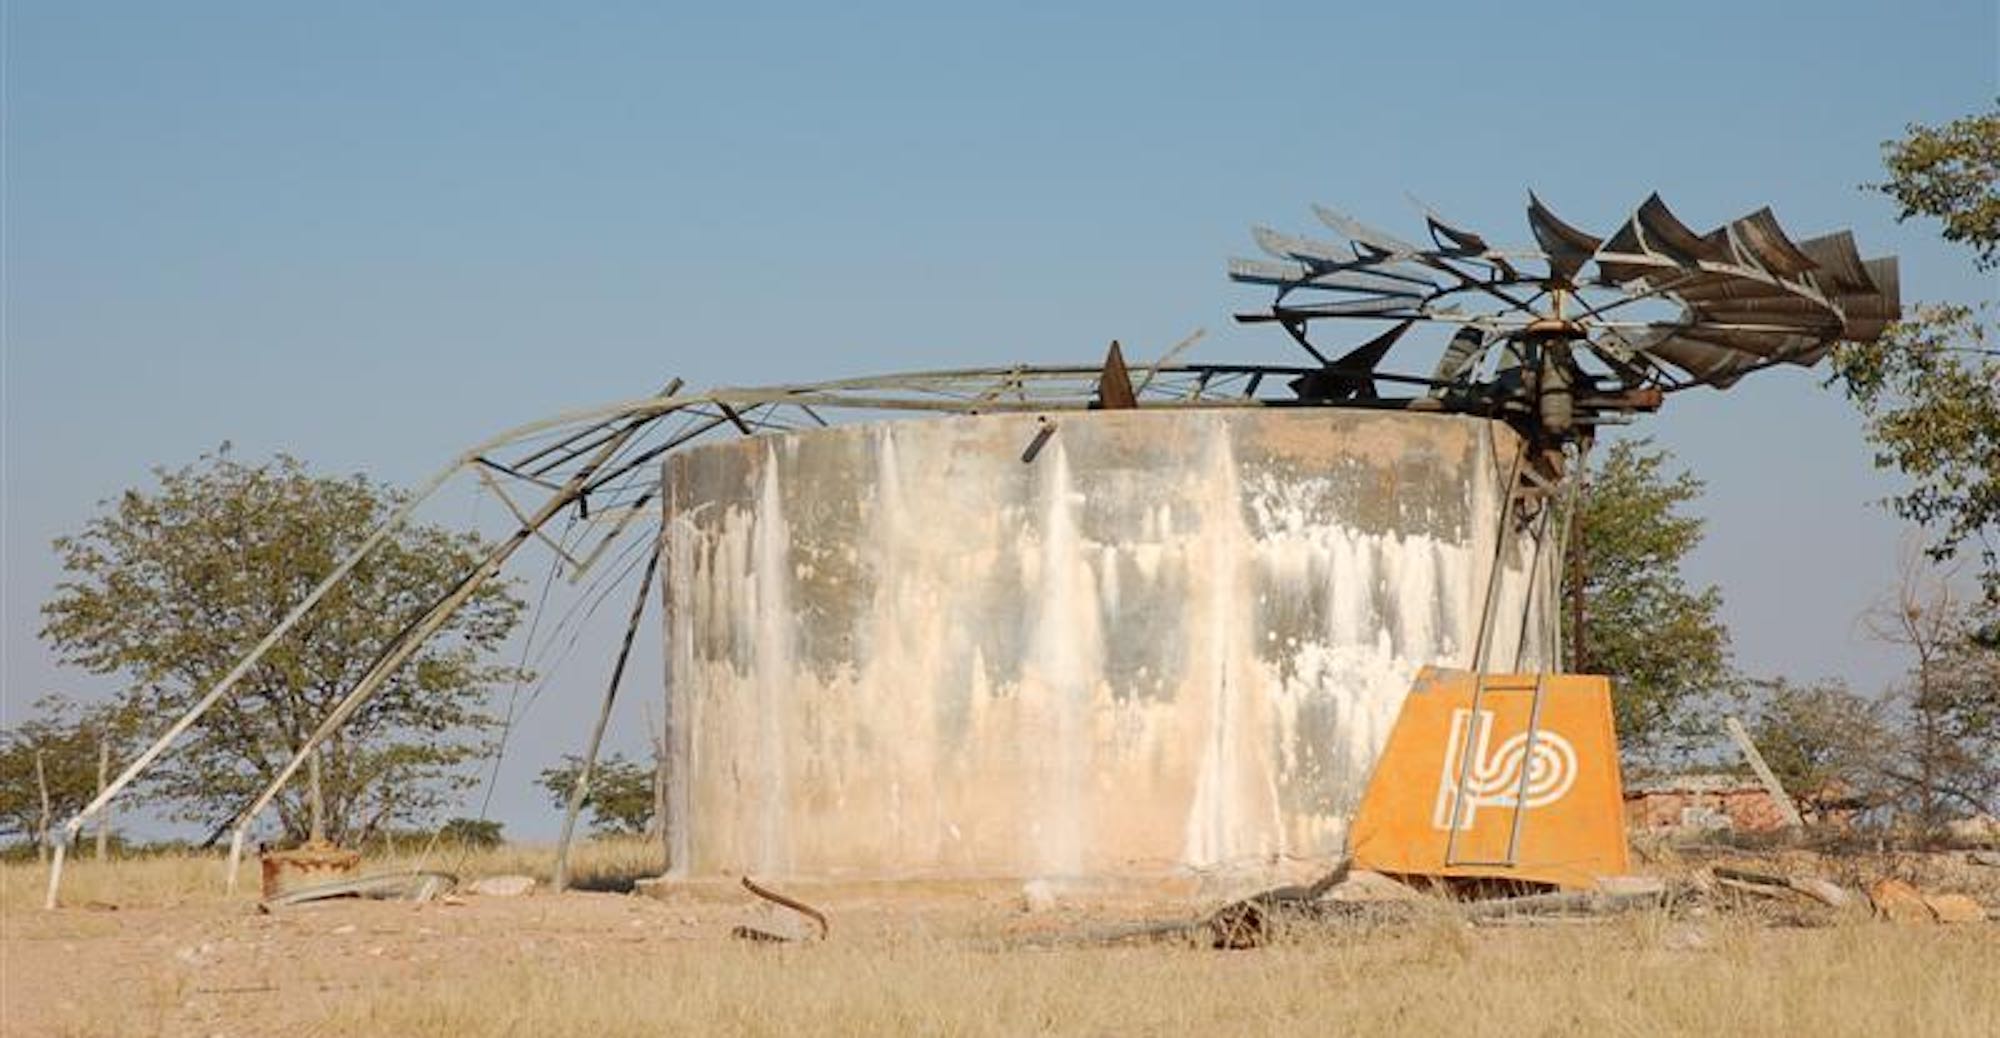 The broken remains of a windmill used to pump water from a borehole lies horizontally across a cement water tank.